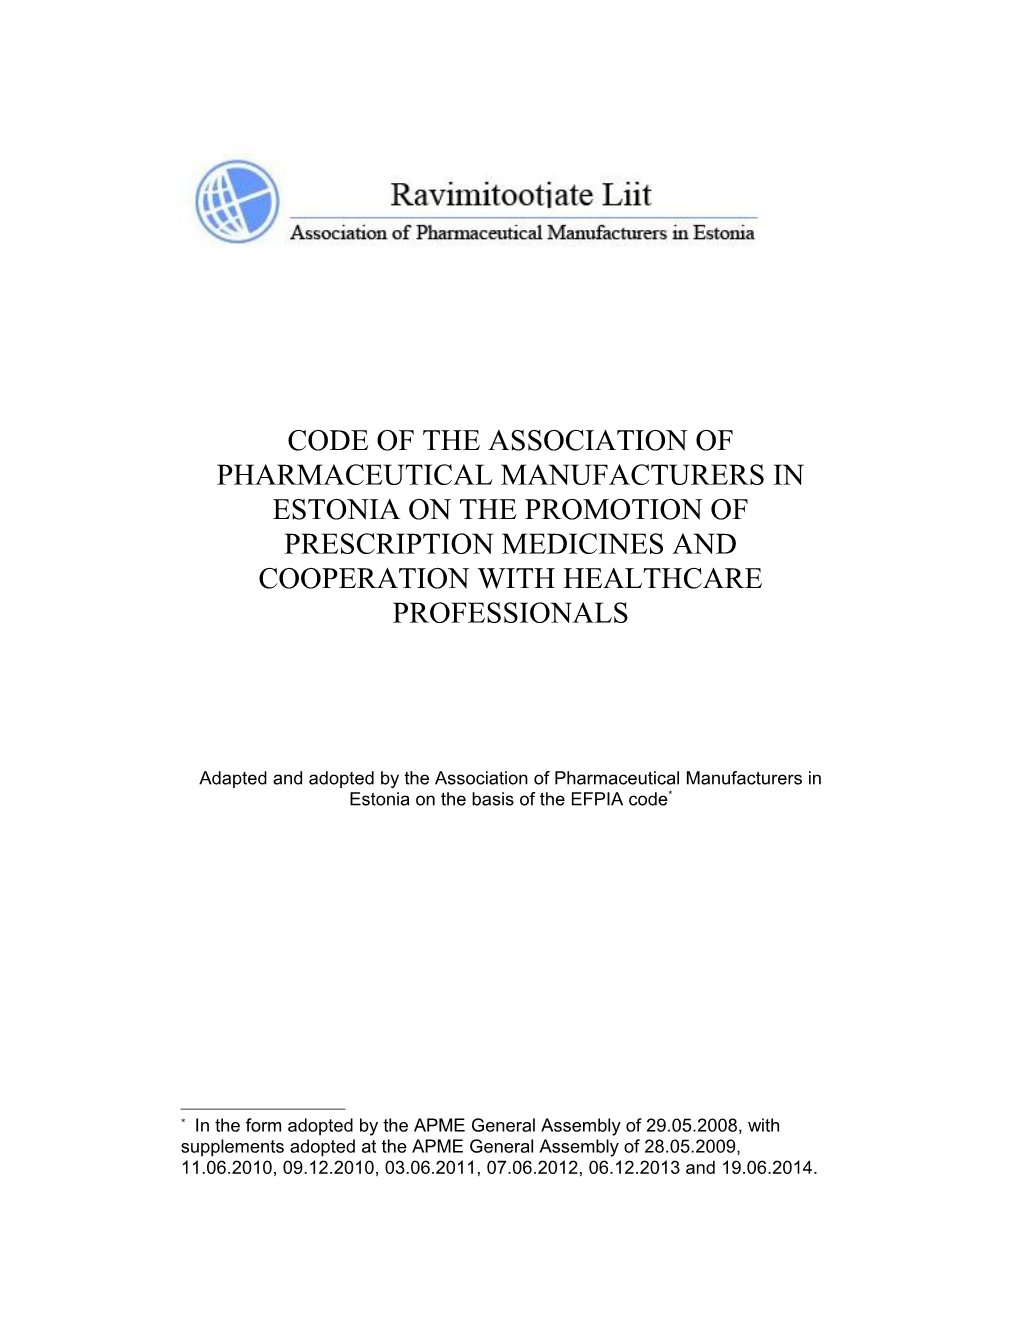 Code of the Association of Pharmaceutical Manufacturers in Estonia on the Promotion Of